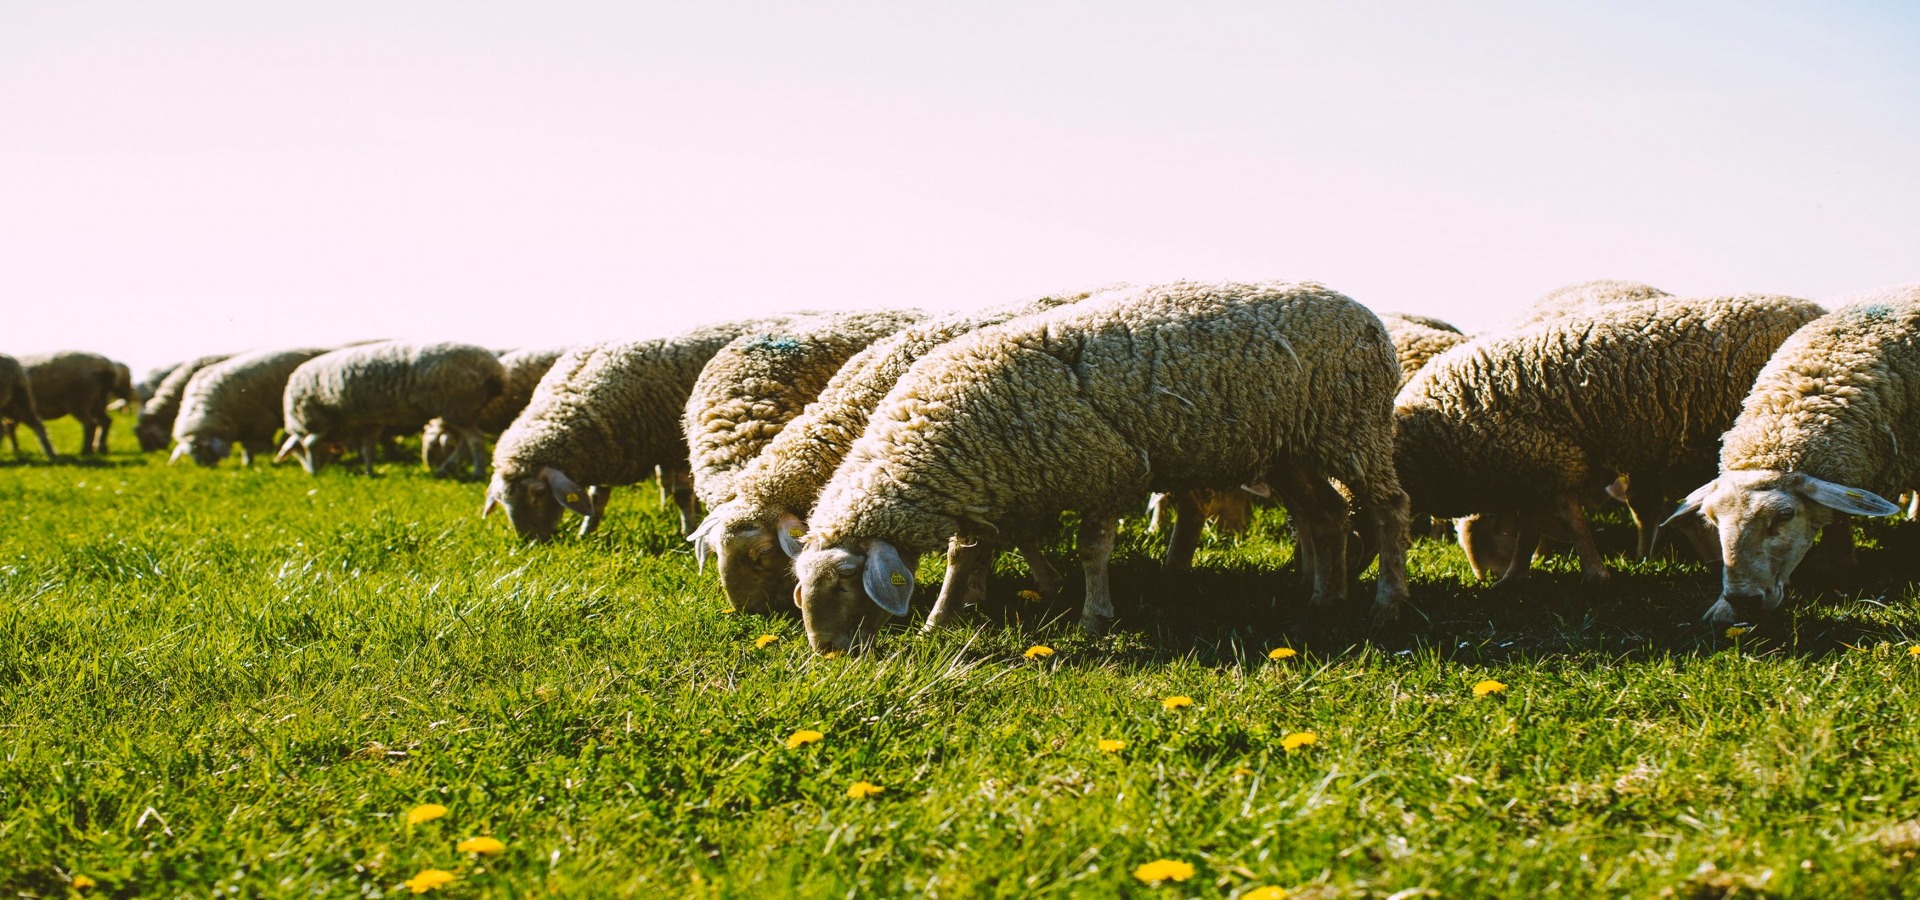 When moving collectively, sheep democratically alternate their group leader, physics shows